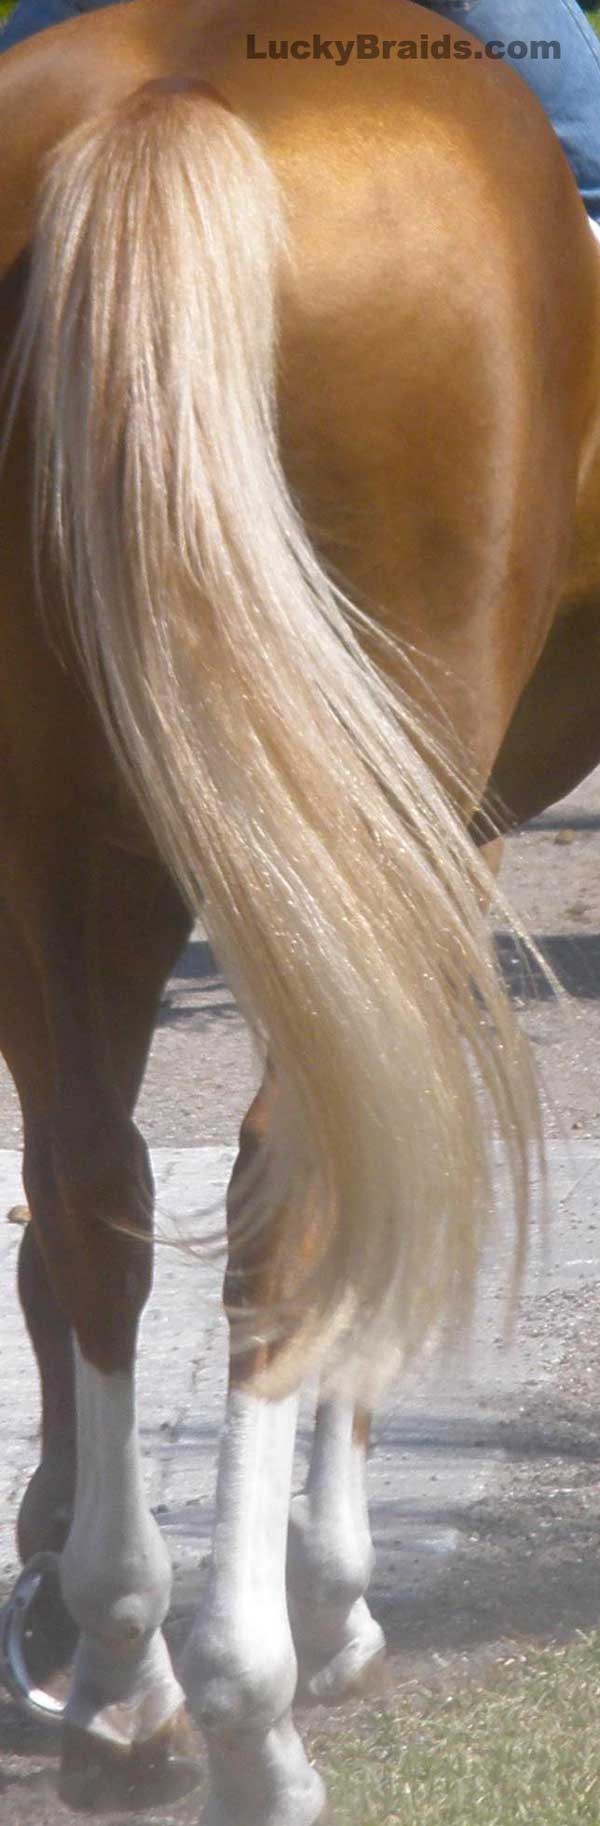 Big Tails - How Virtually Any Horse Can Have a Naturally Full Tail